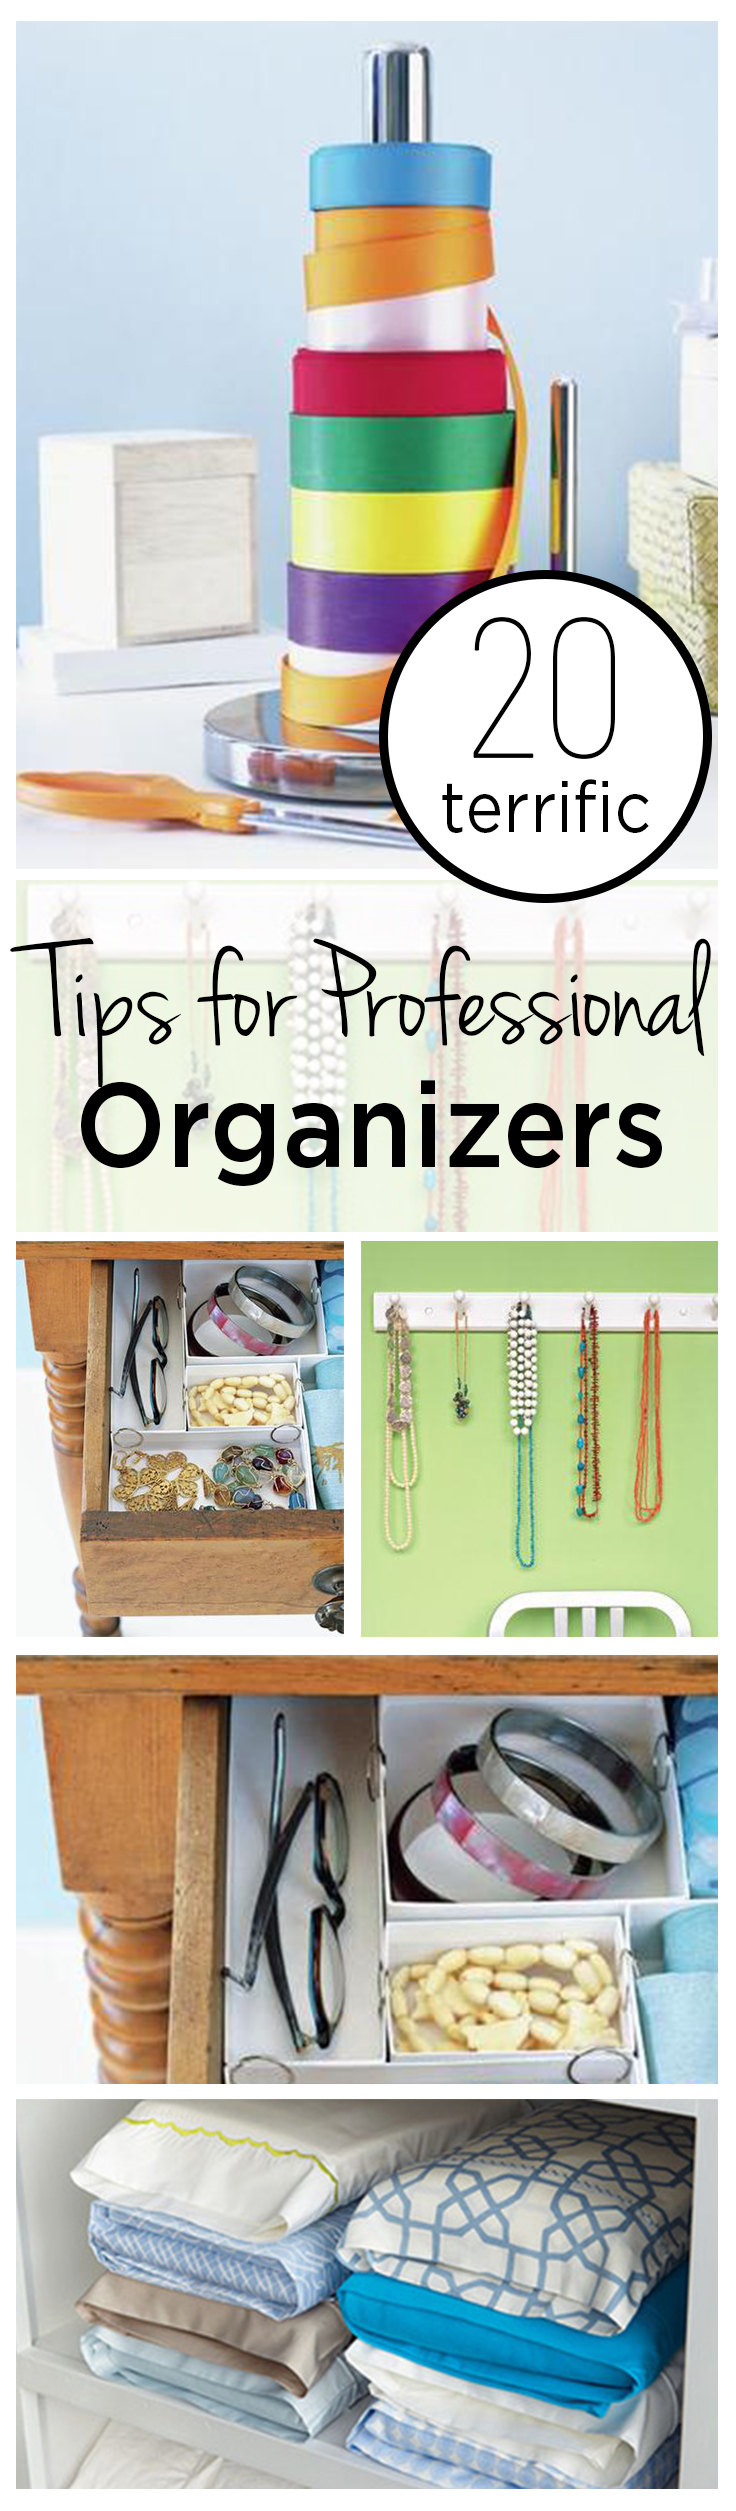 20 Terrific Tips for Professional Organizers (1)